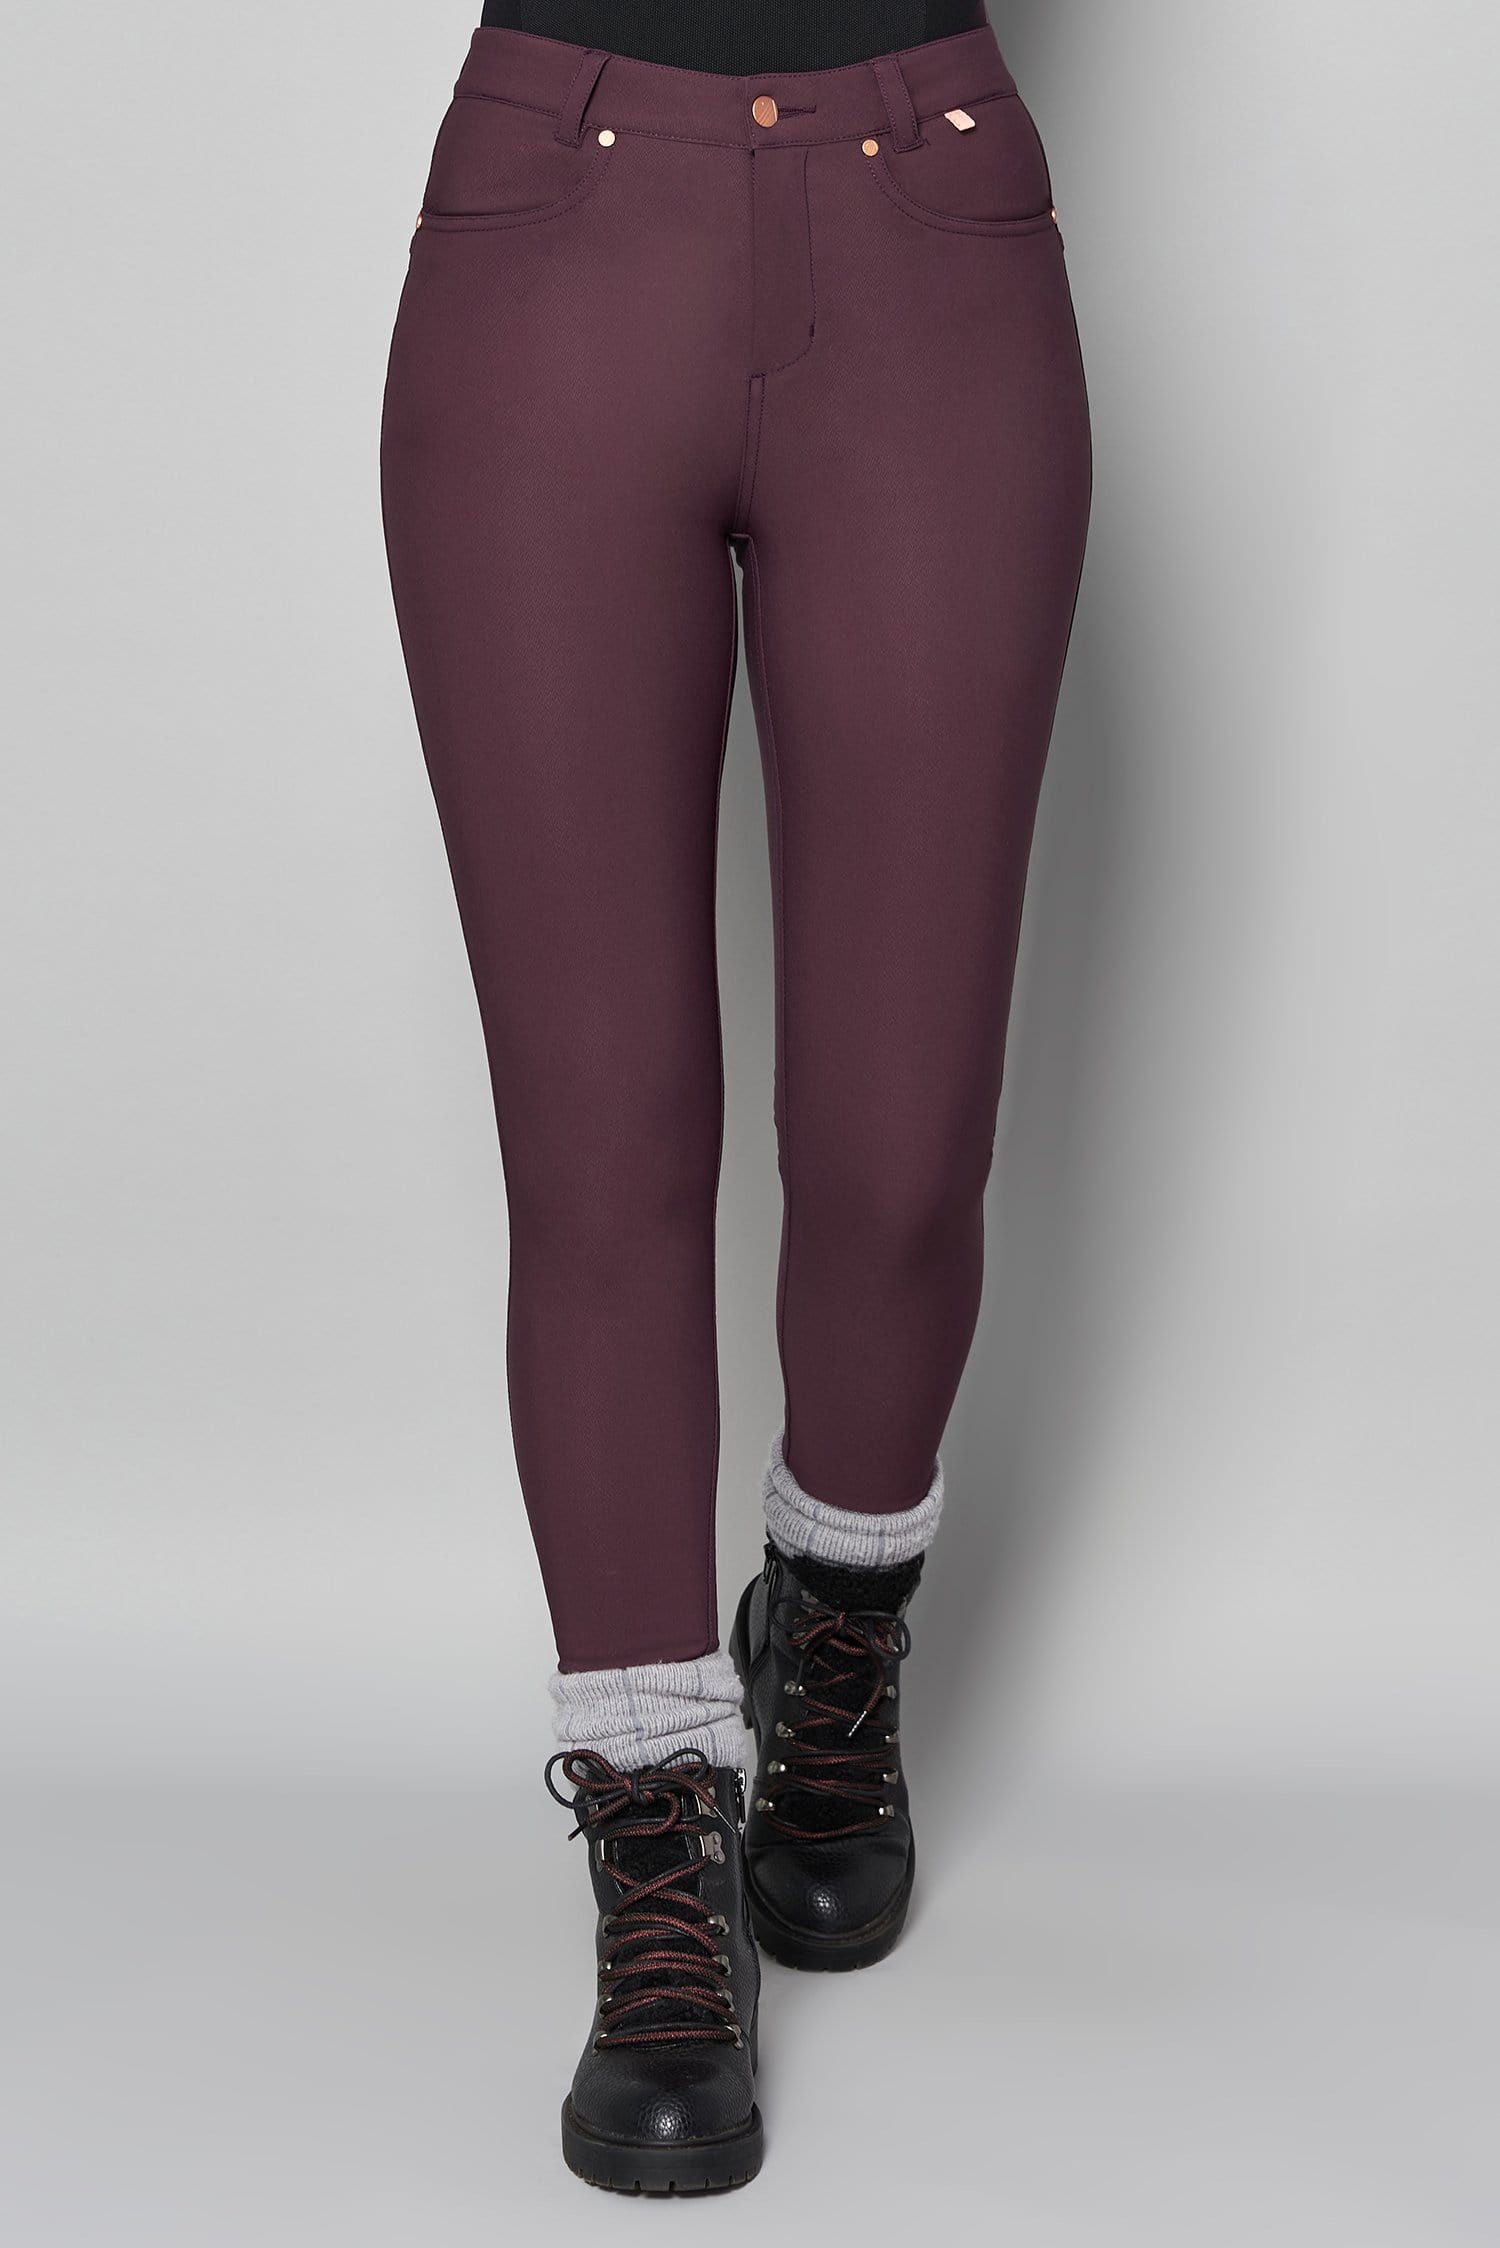 Thermal Skinny Outdoor Trousers - Aubergine - 38l / Uk20 - Womens - Acai Outdoorwear